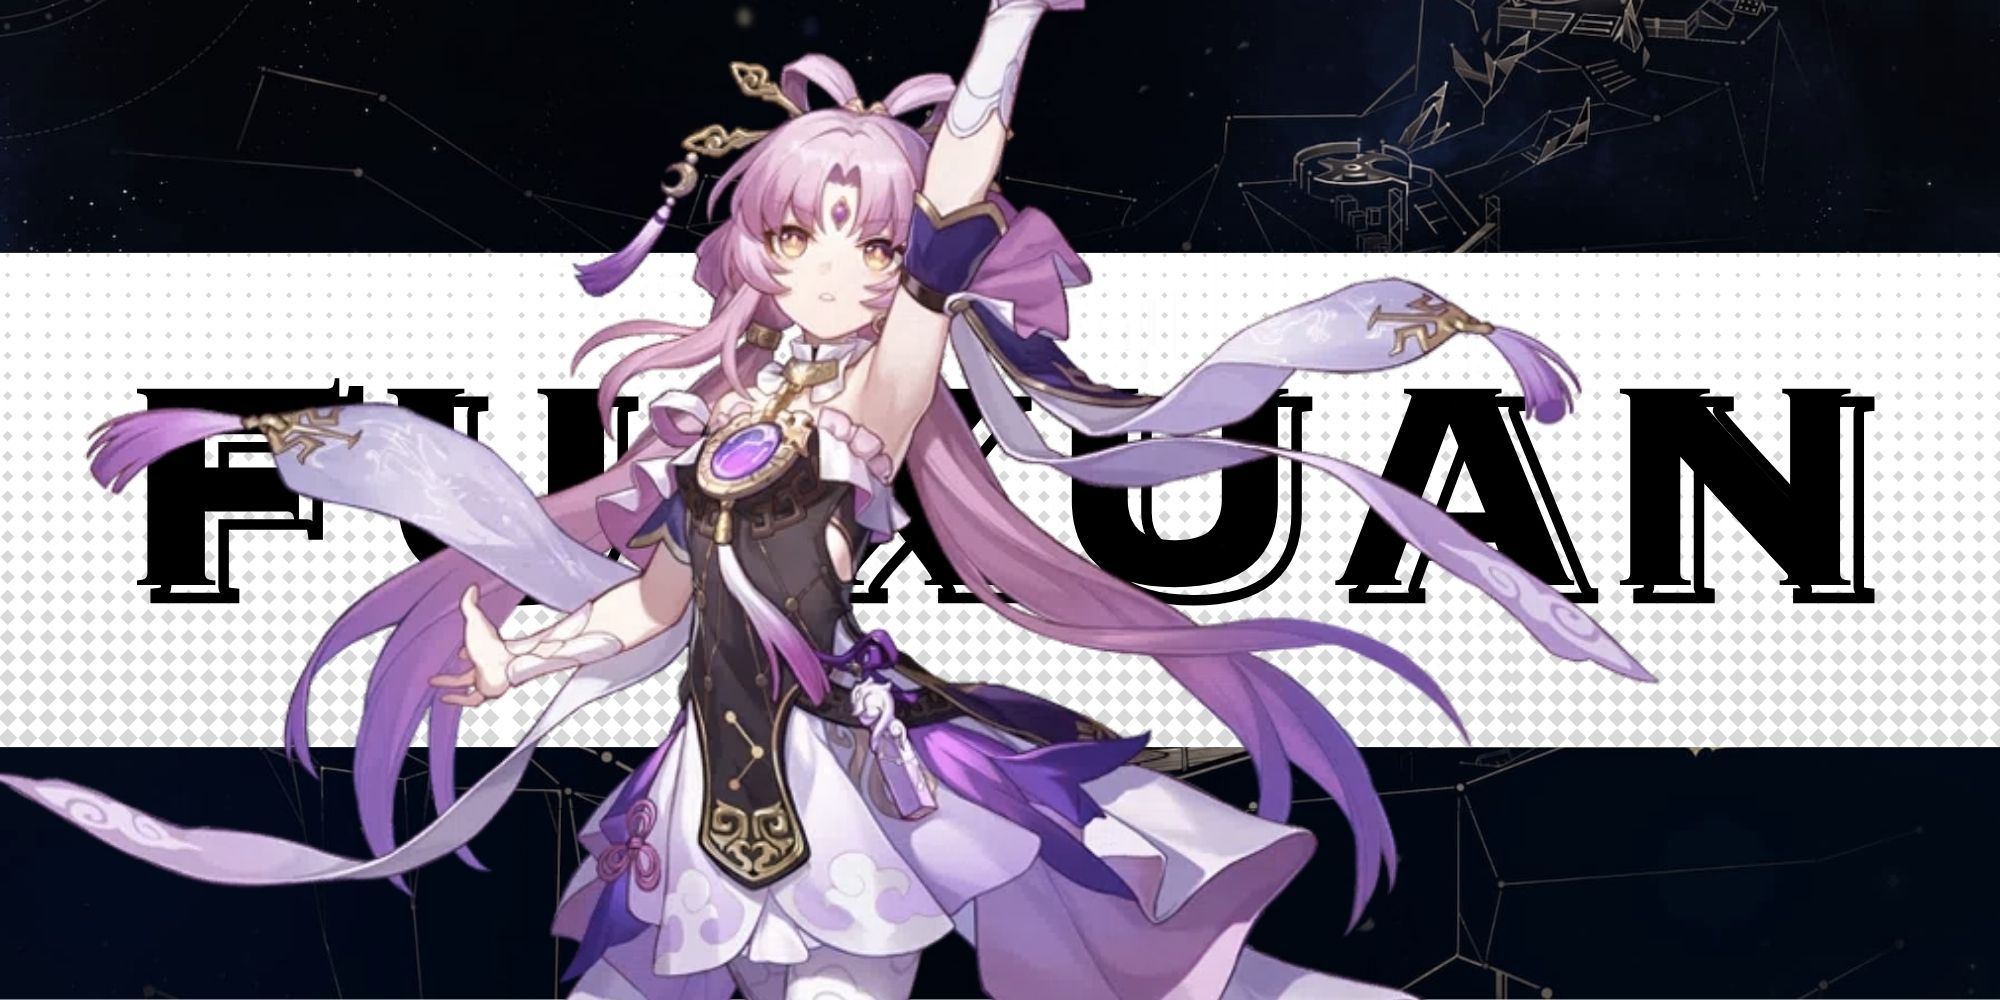 Honkai: Star Rail  Every Preservation Character, Ranked